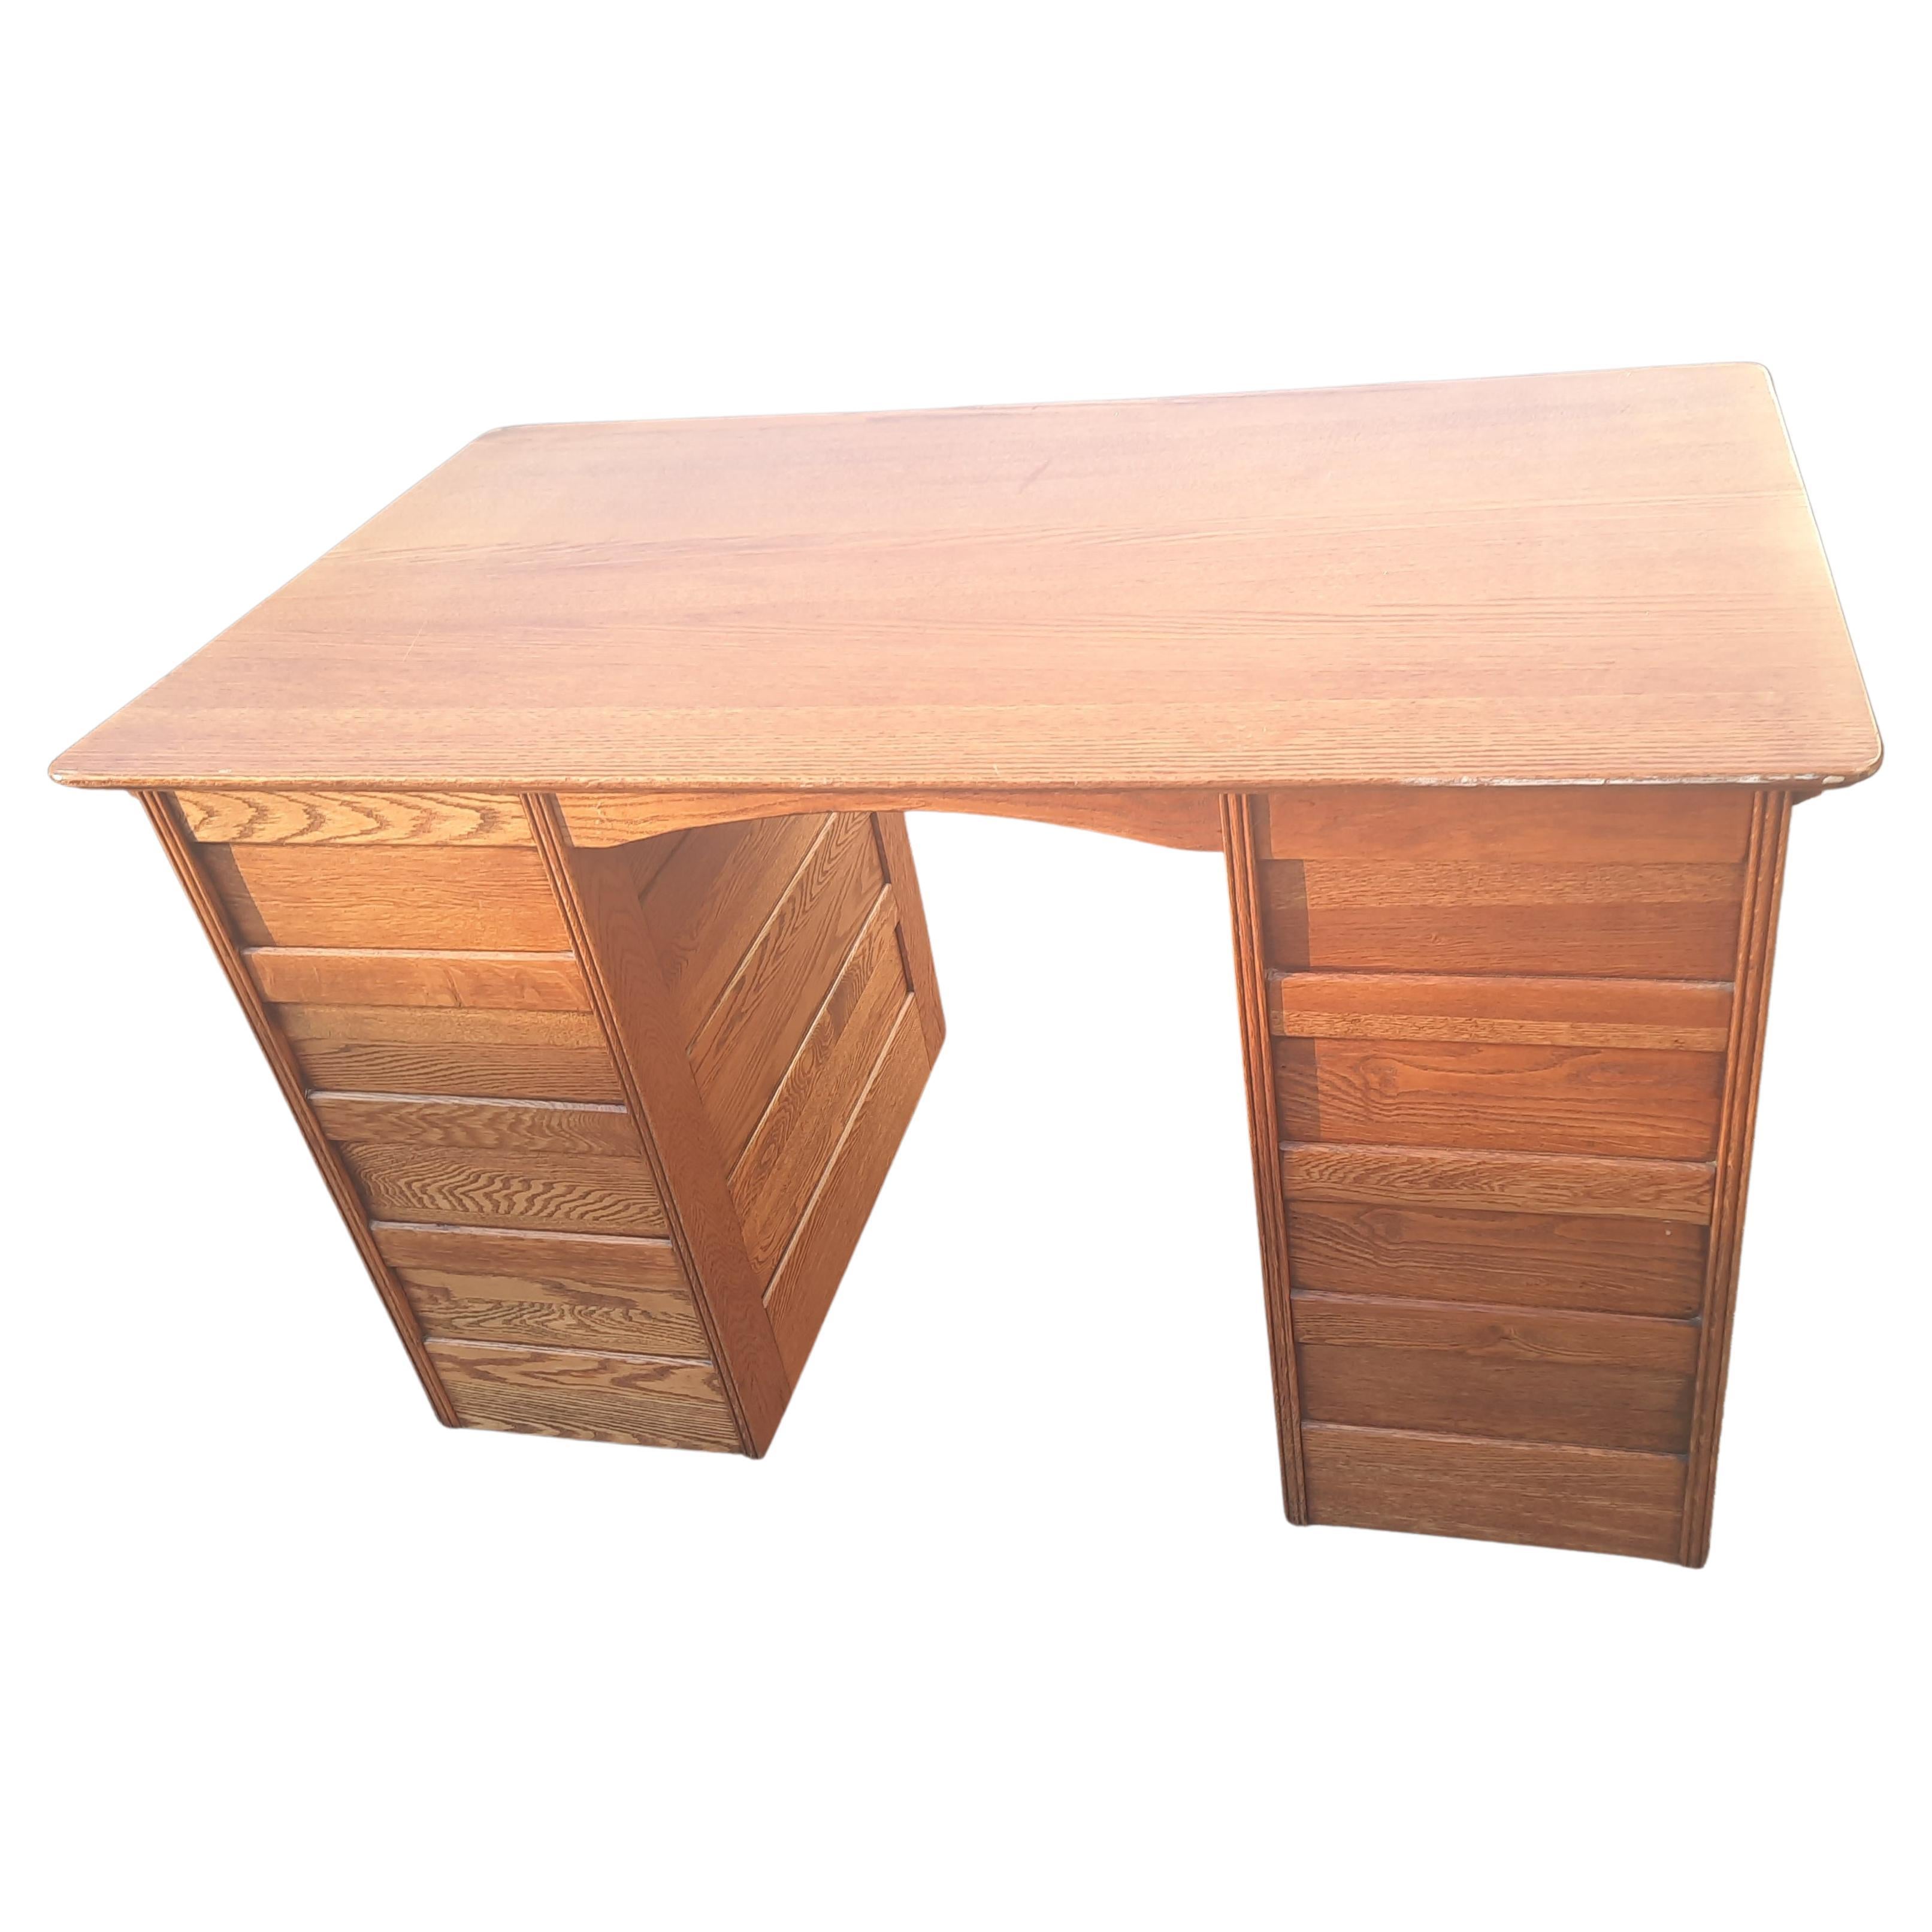 Handcrafted Solid Oak Partners Desk Writing Desk on Wheels, circa 1960 For Sale 2